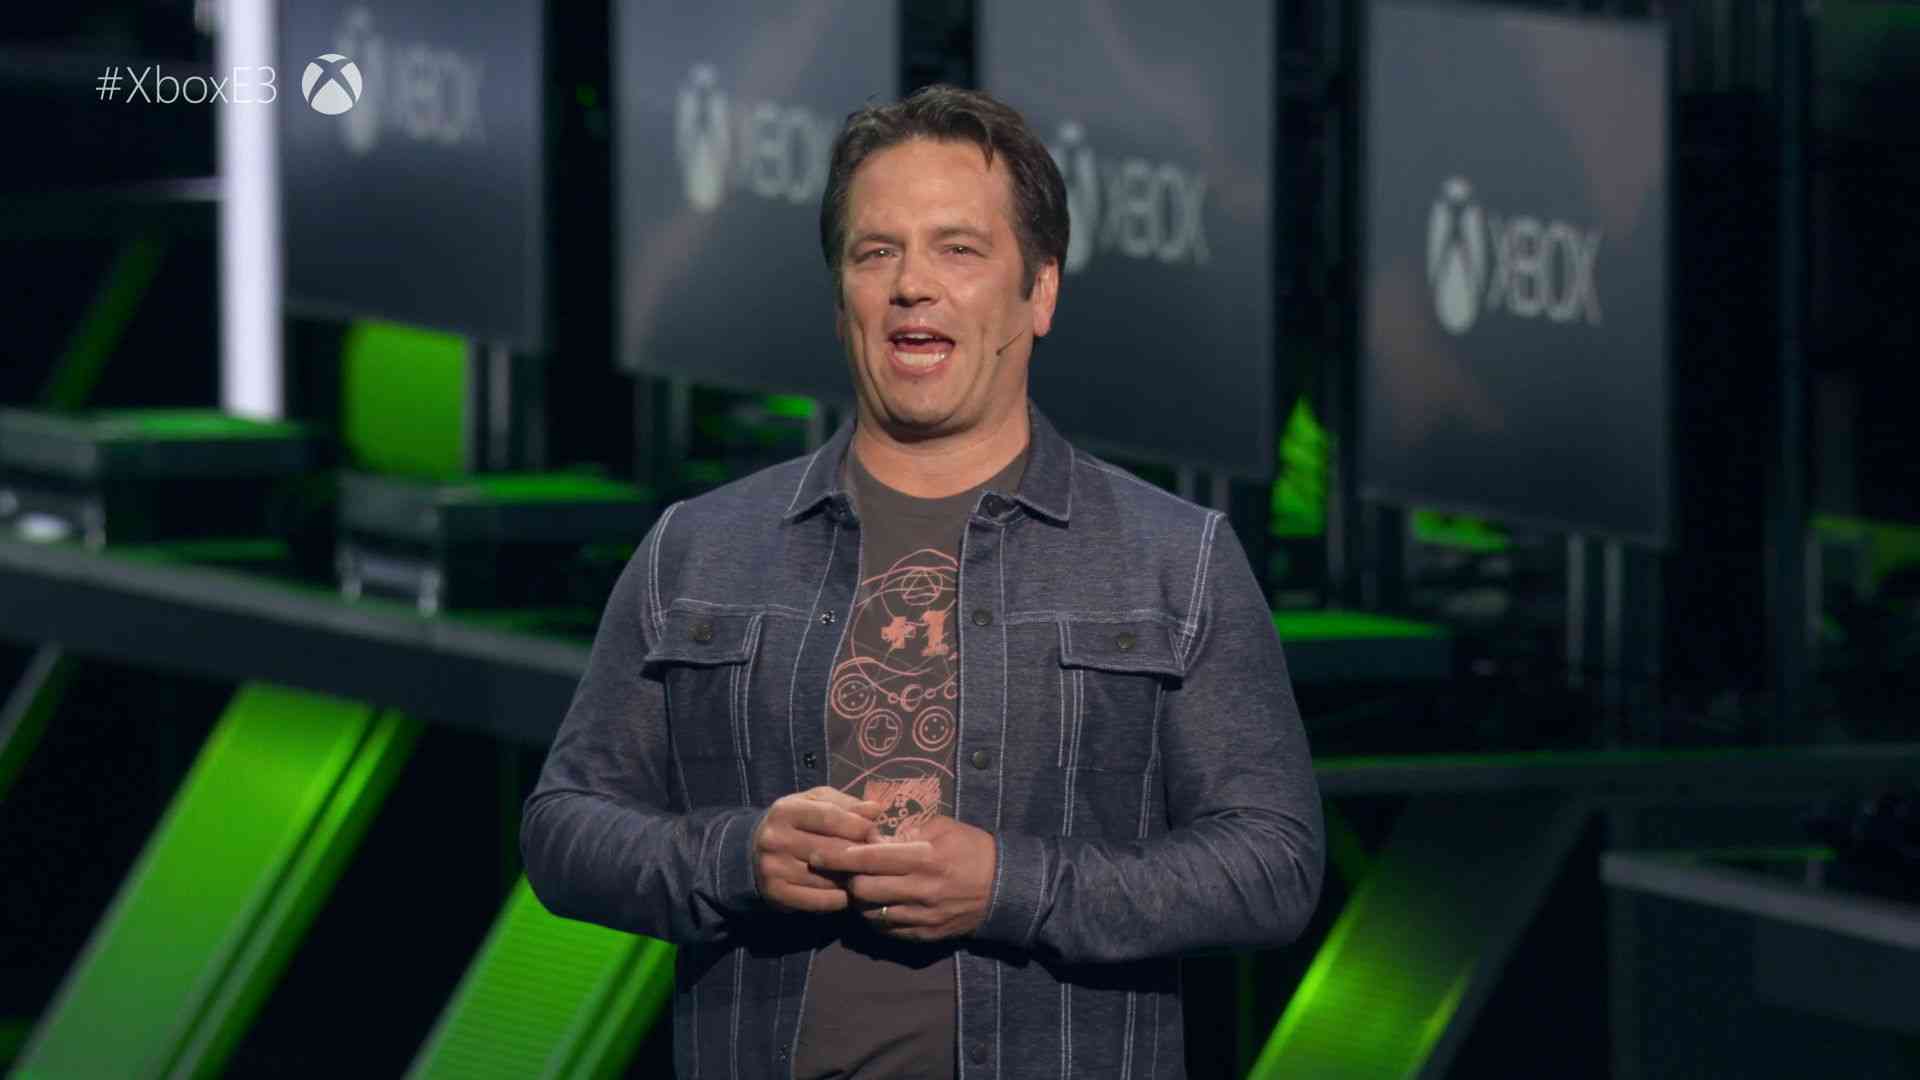 microsoft will go big in e3 2019 phil spencer says 1493 big 1